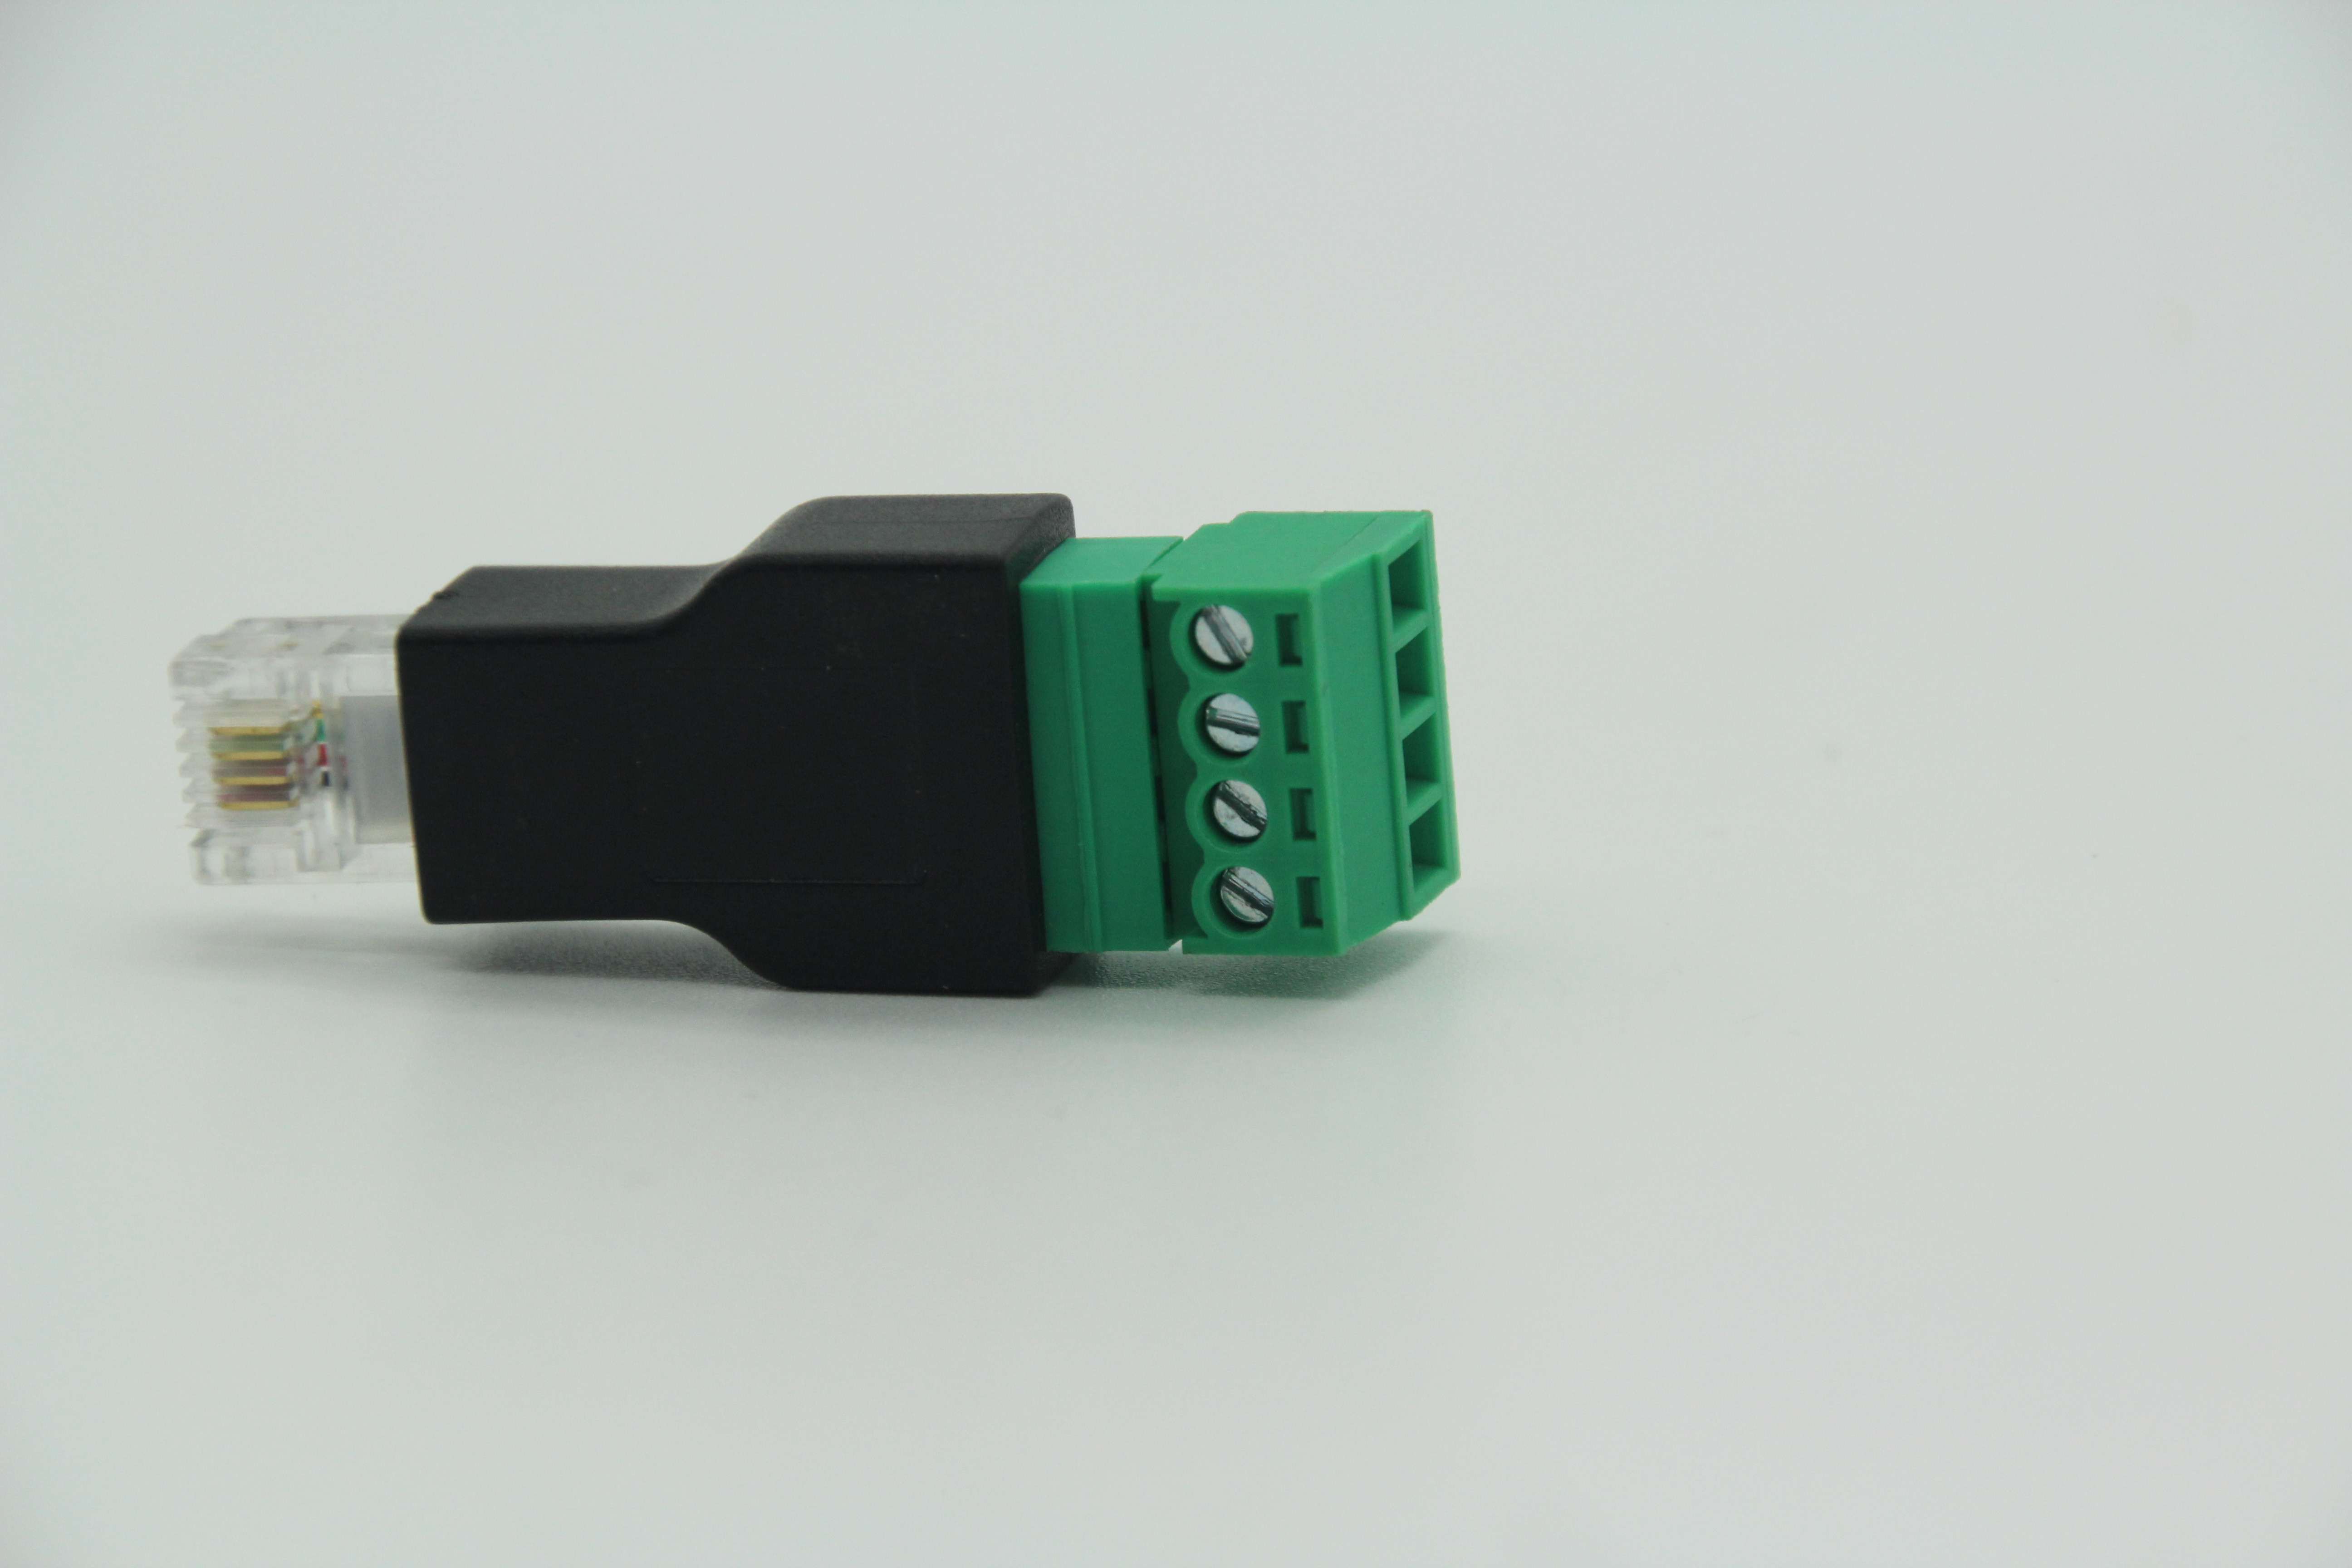 RJ11 TO 4P TERMINAL 6P4C CRYSTAL HEAD TO GREEN TERMINAL NETWORK CONNECTOR SOLDER FREE ADAPTER